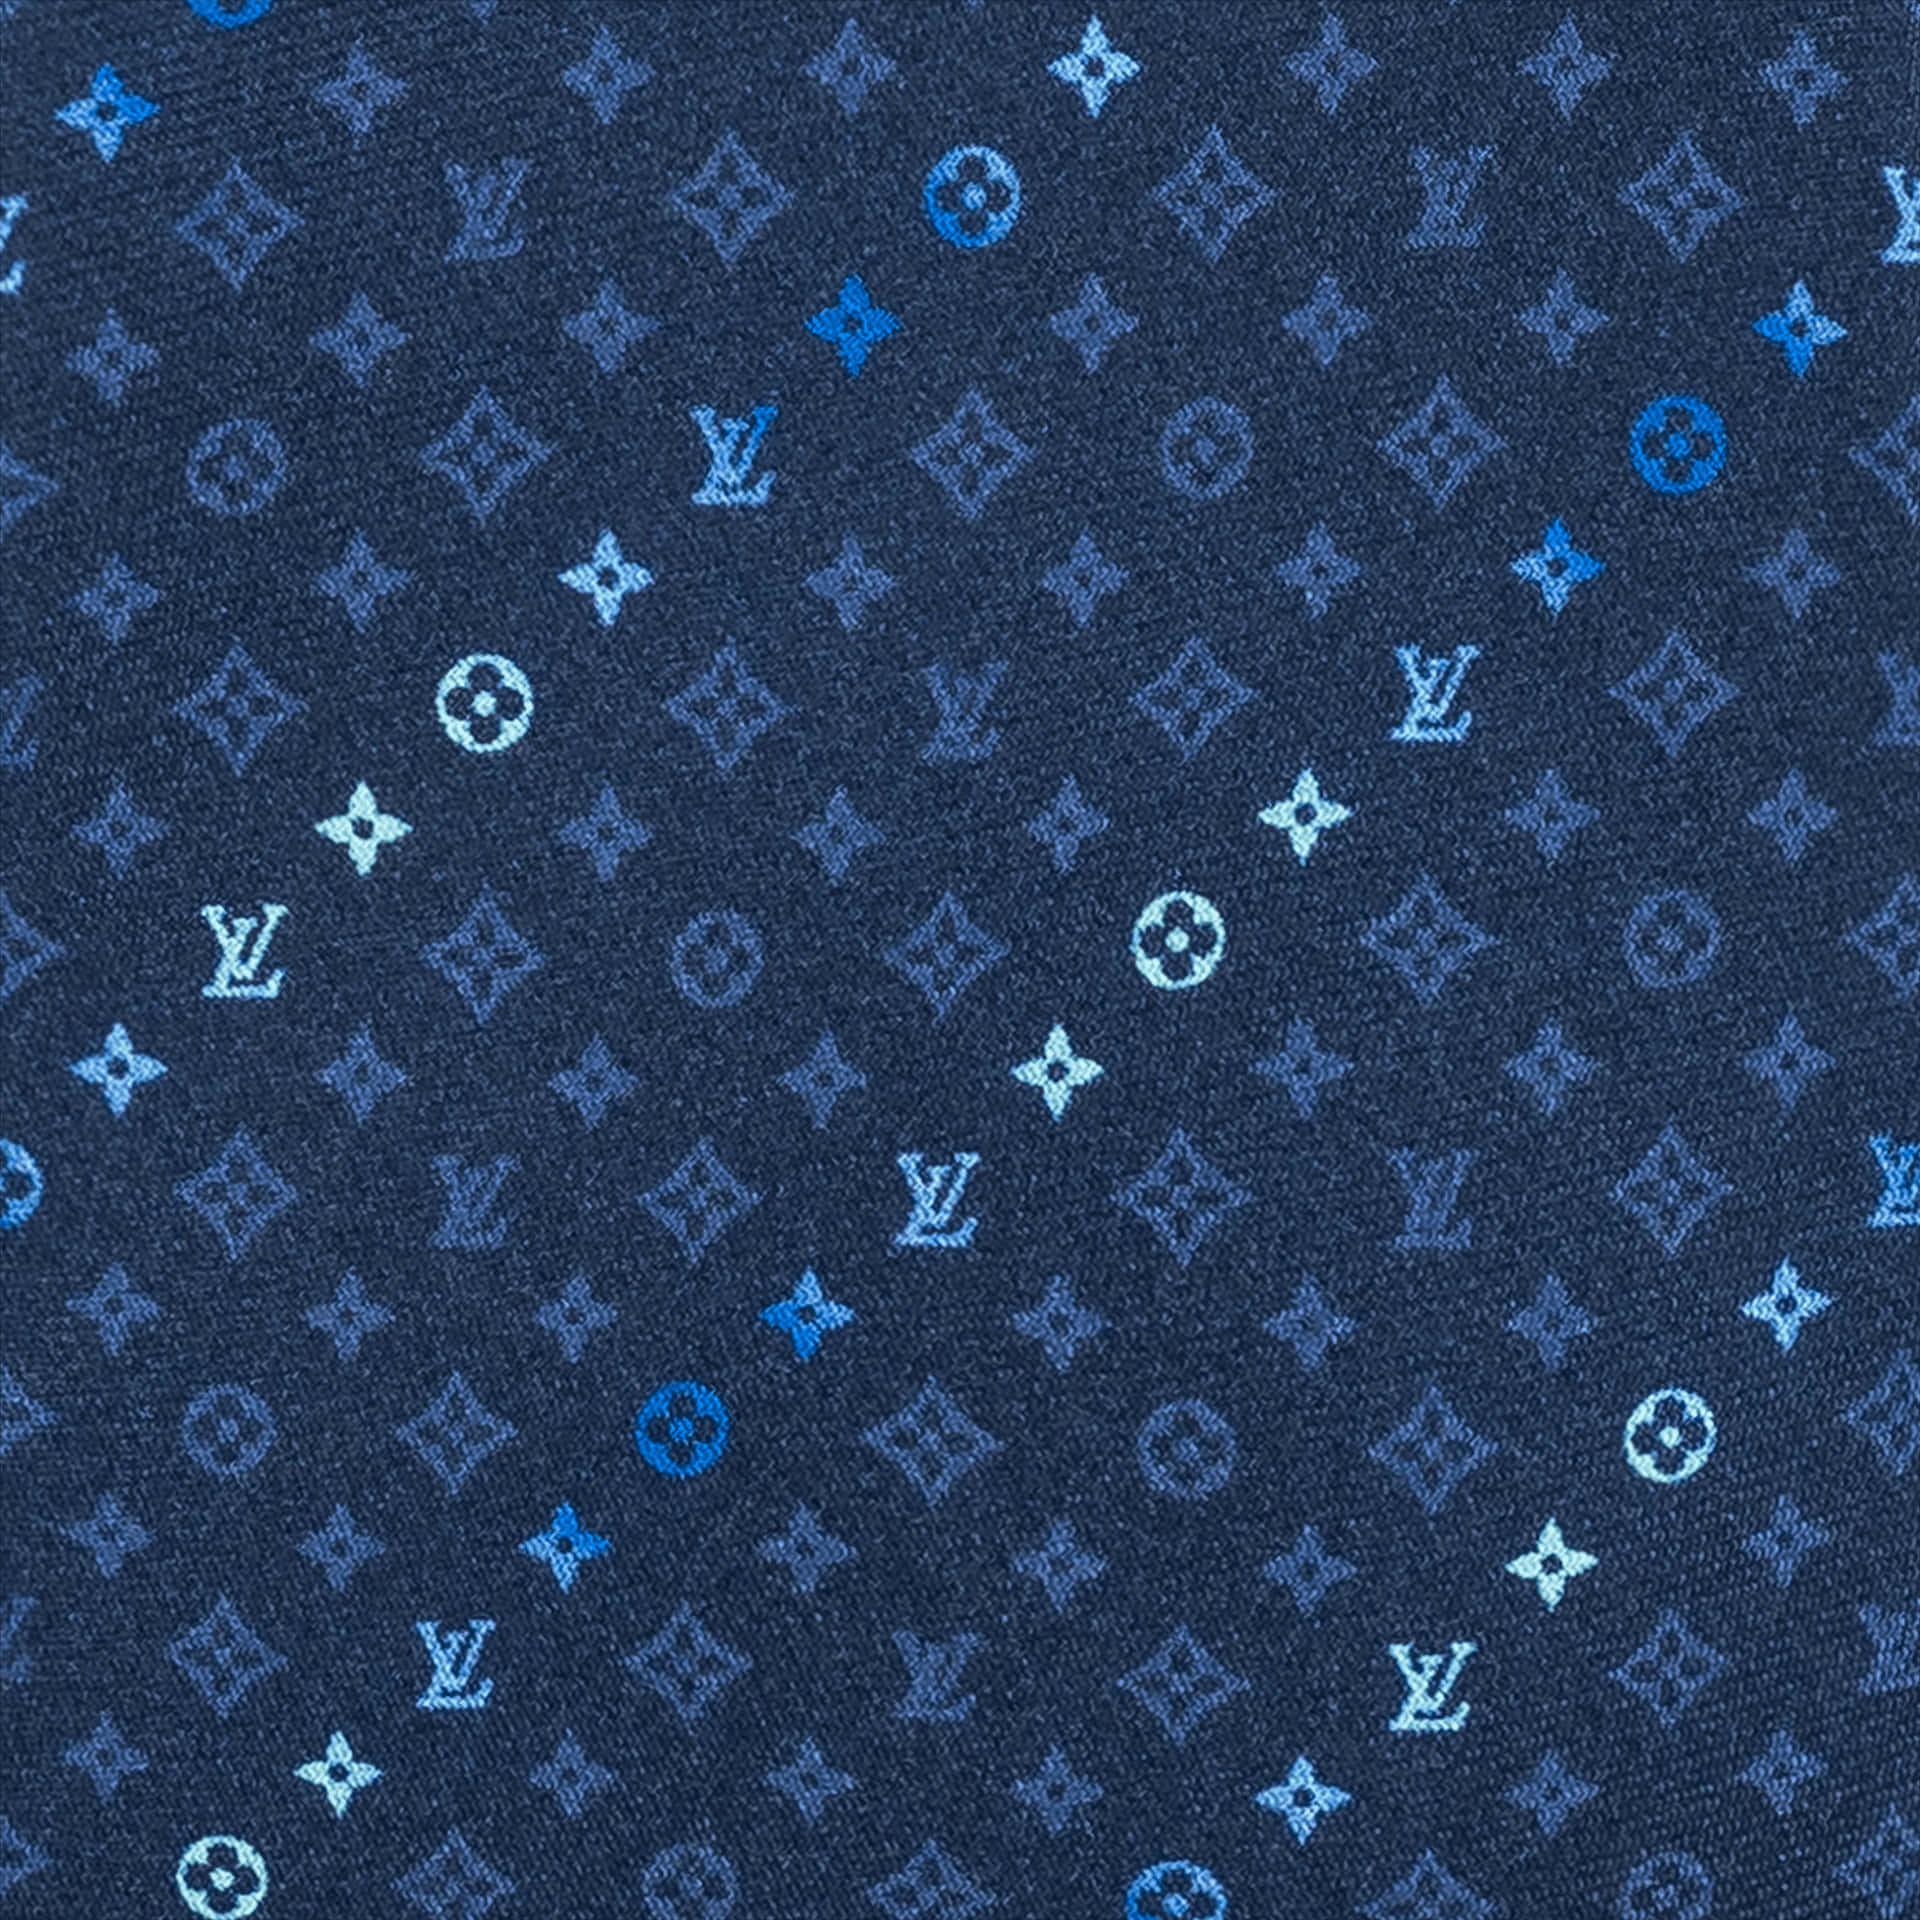 Download Luxury and Elegance Embodied - The Louis Vuitton Blue Wallpaper